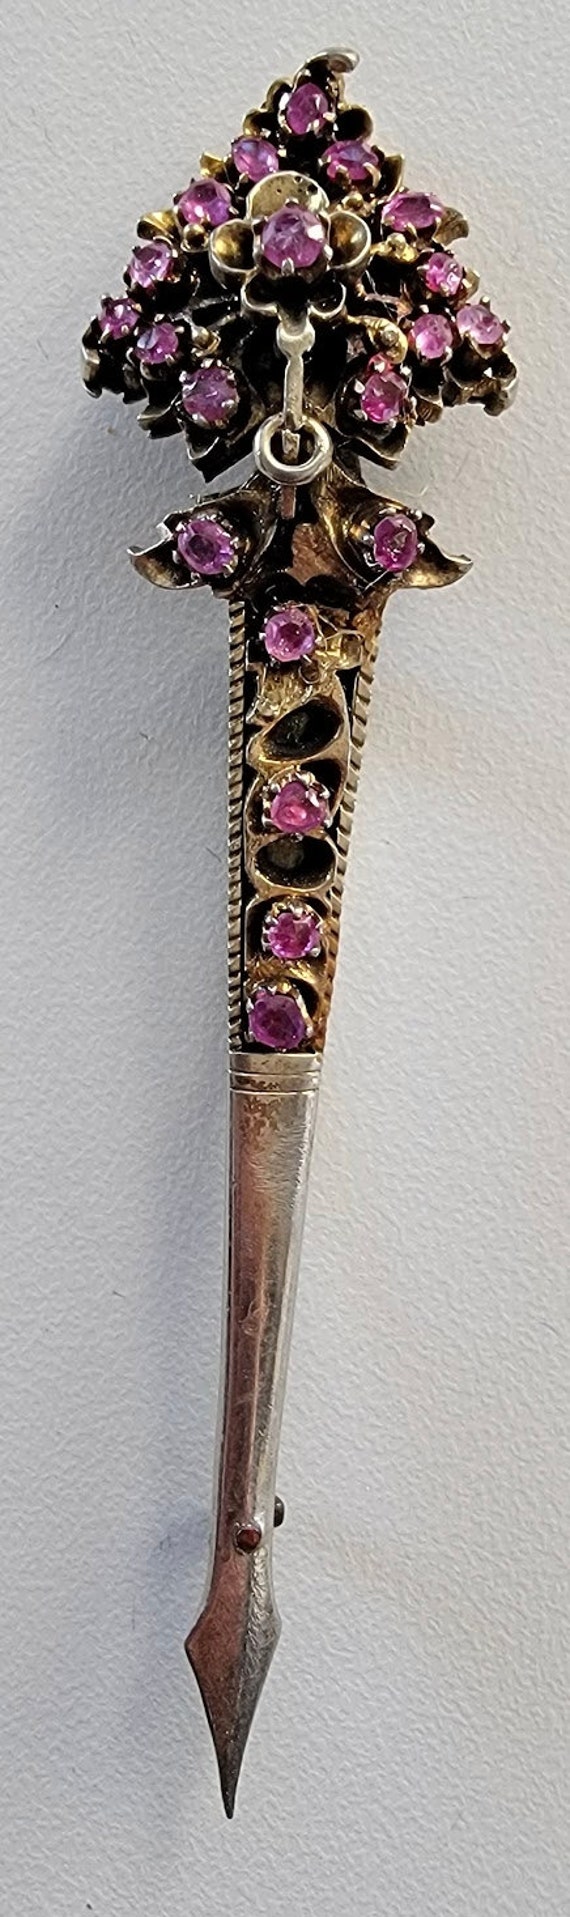 Anglo Indian Pale Pink Rubies/Sapphires Sarpech or